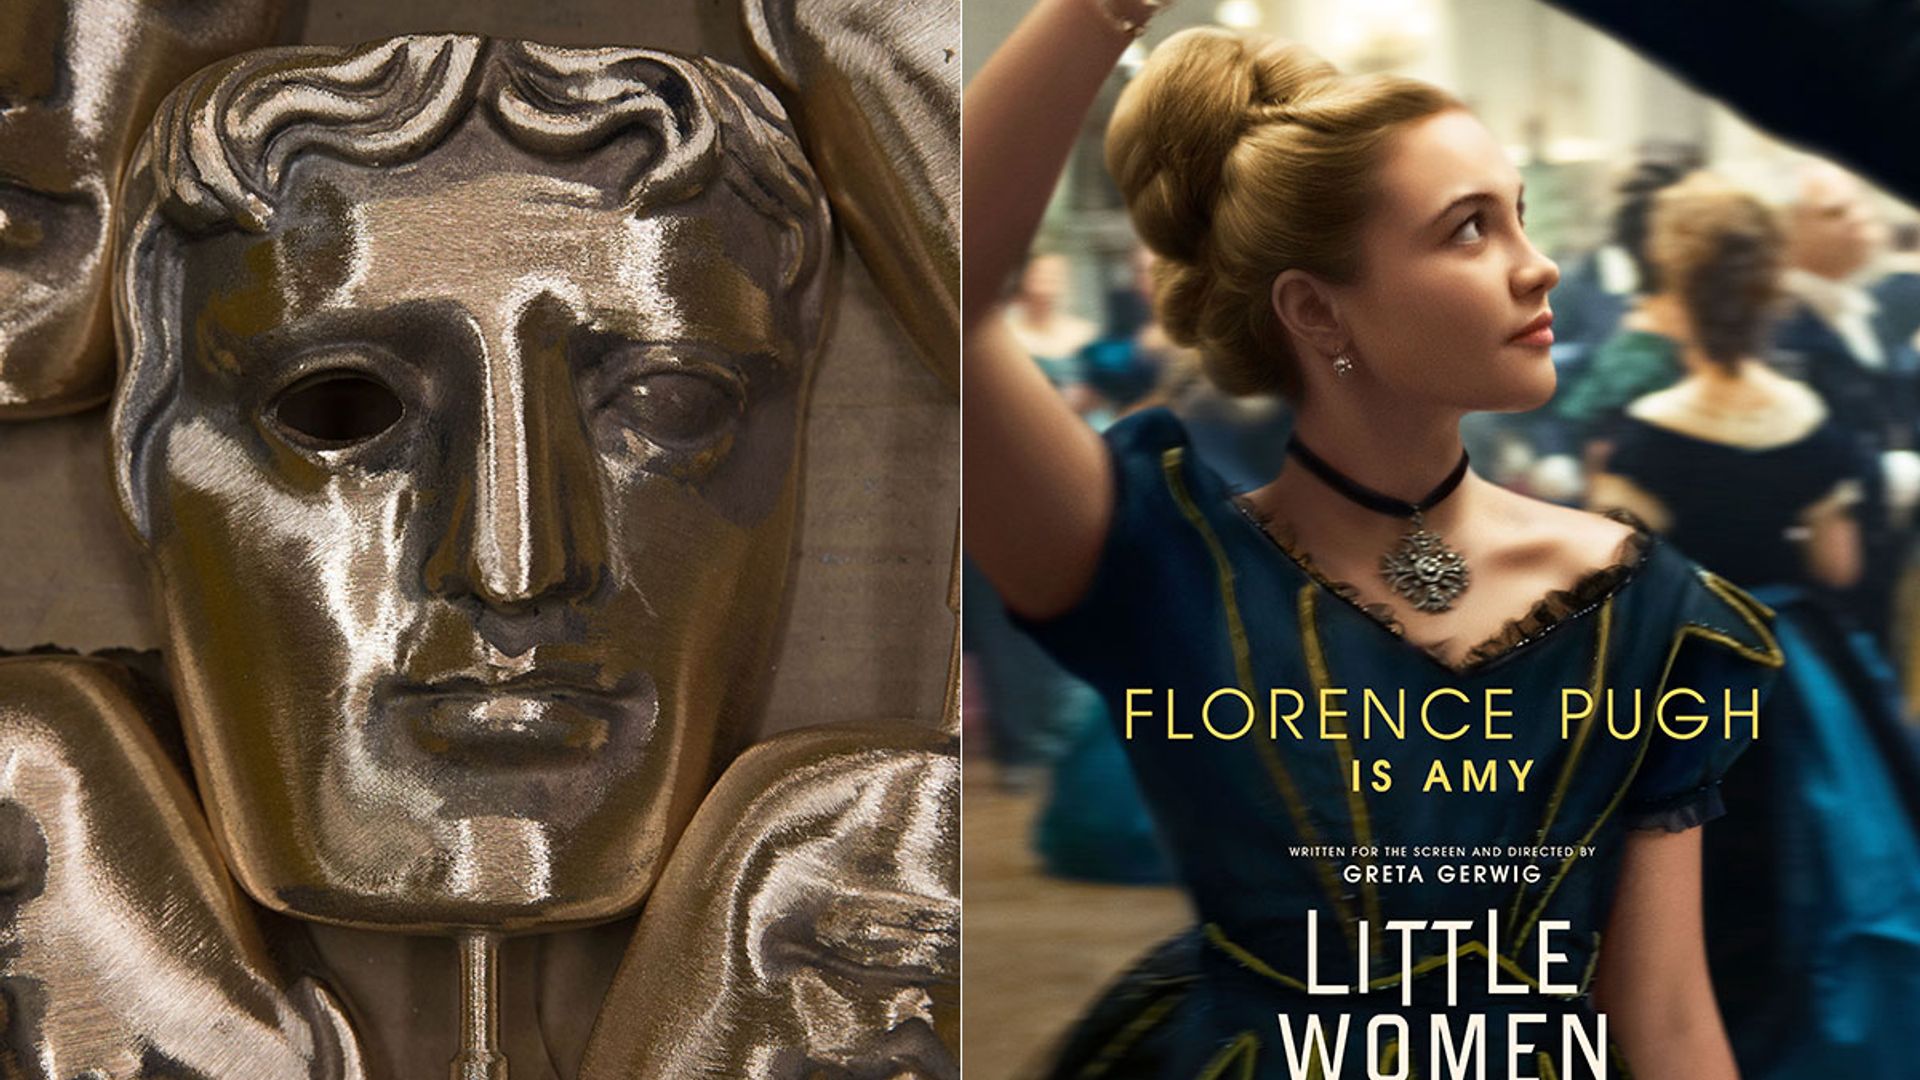 Florence Pugh receives BAFTA nomination for Little Women - see full list of nominees